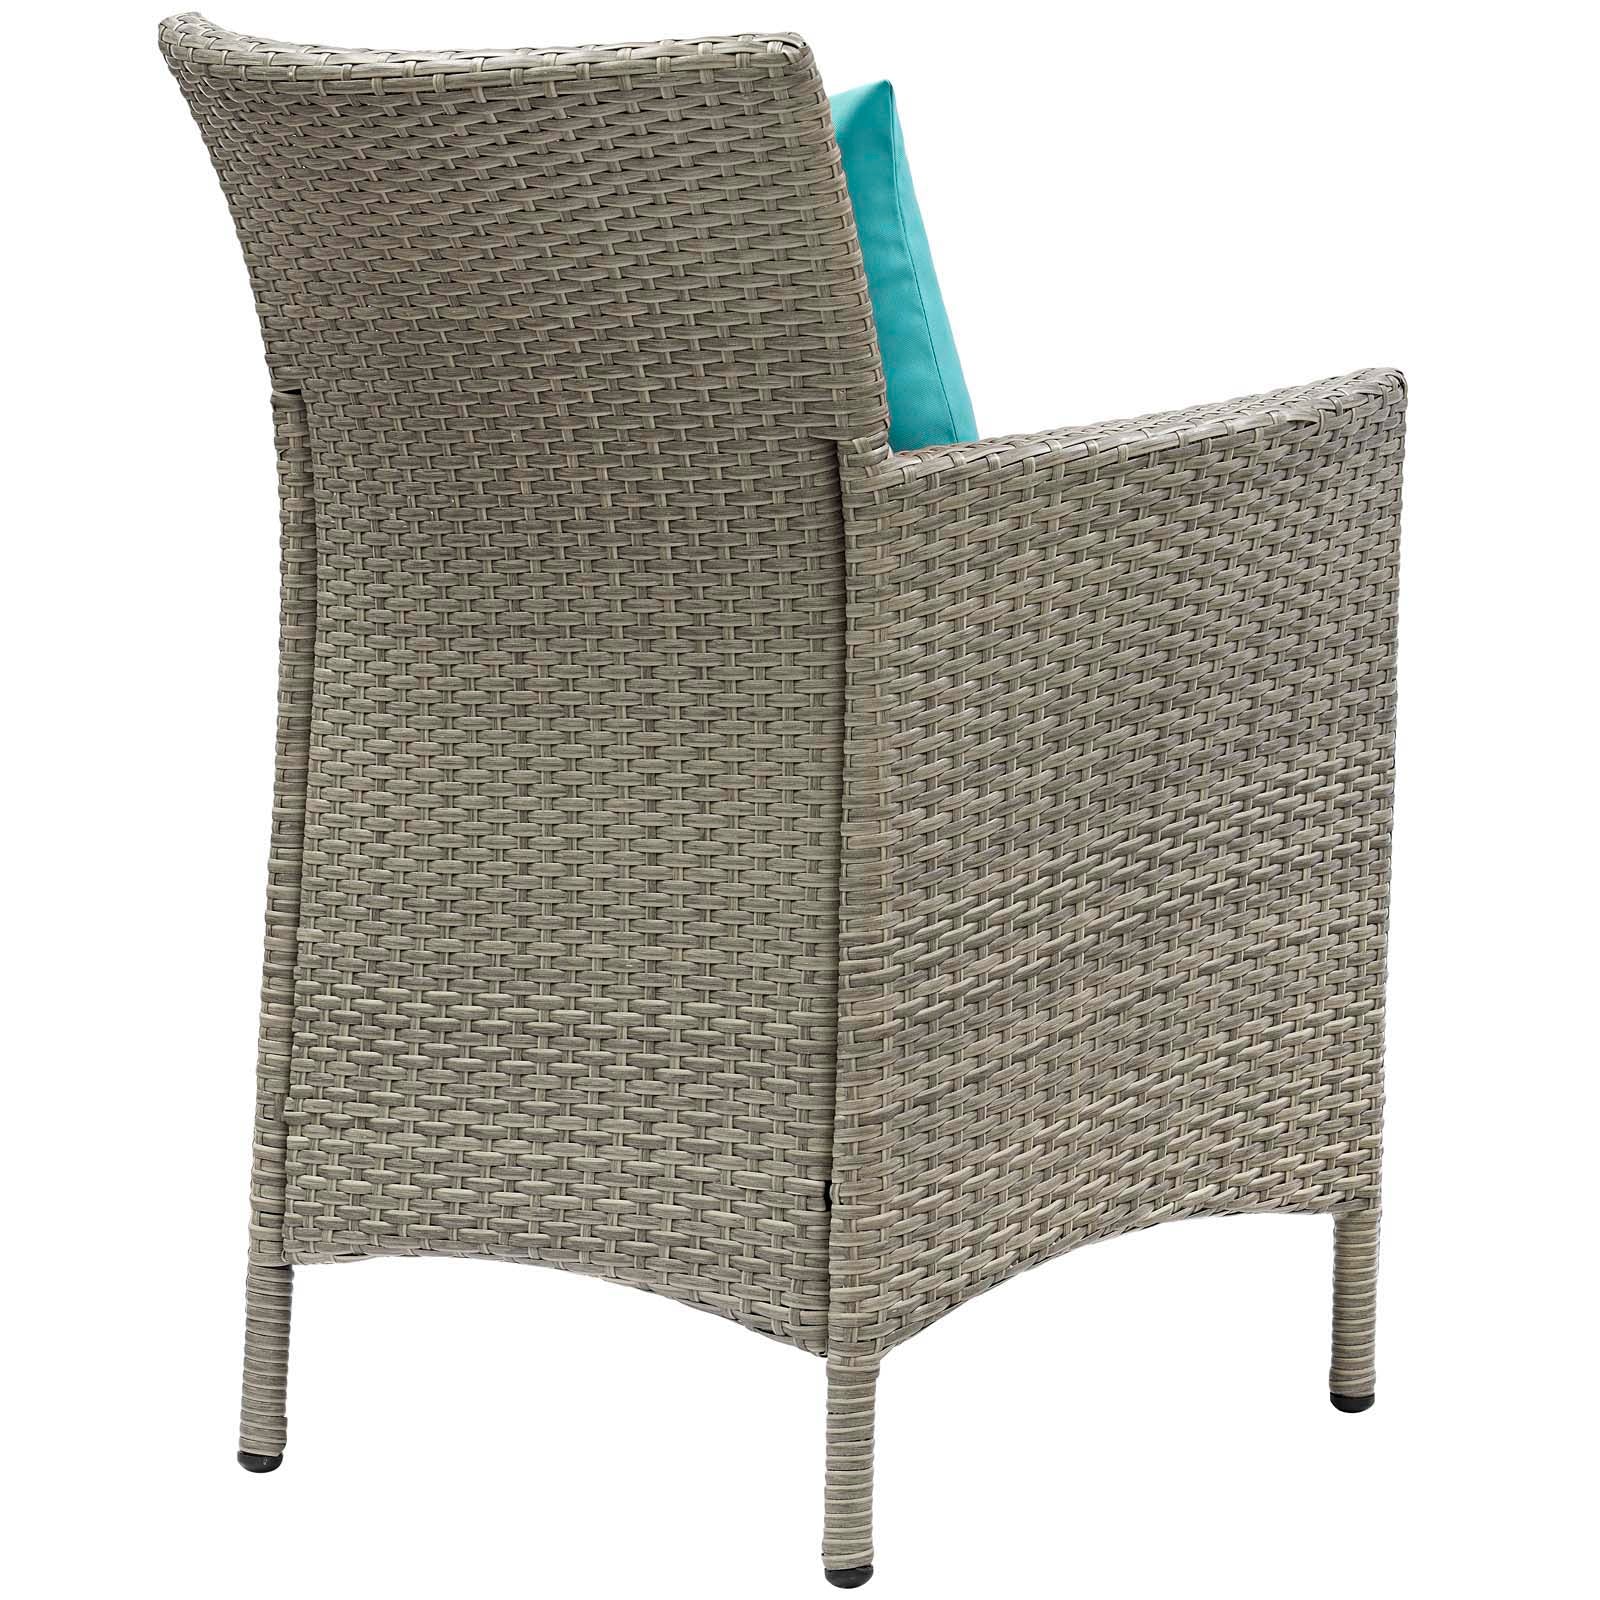 Modway Outdoor Dining Chairs - Conduit Outdoor Patio Wicker Rattan Dining Armchair Set of 4 Light Gray Turquoise